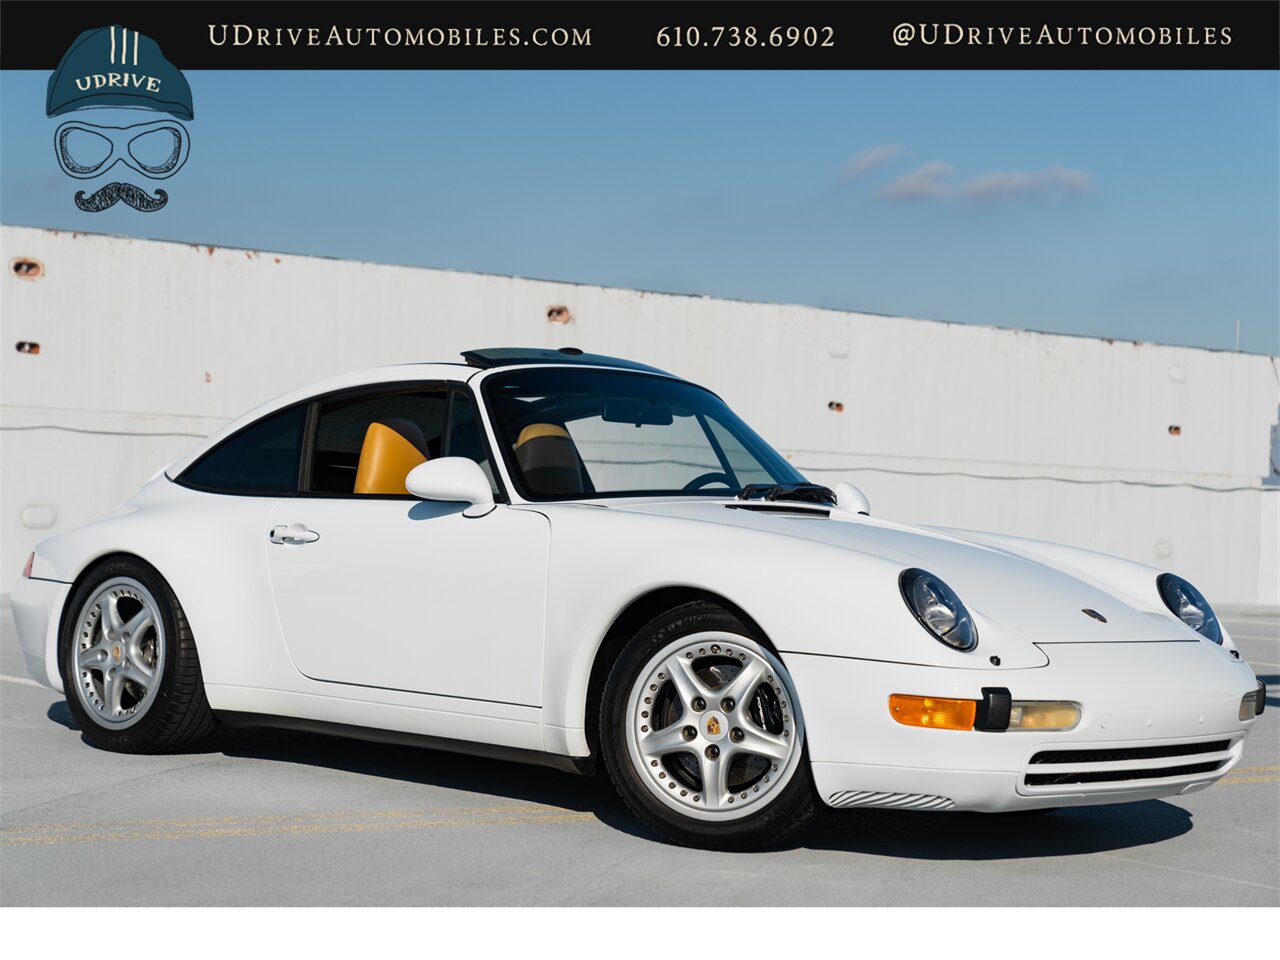 1998 Porsche 911 Carrera 993 Targa  1 of 122 Produced 6 Speed $10k Recent Service Engine Reseal - Photo 3 - West Chester, PA 19382